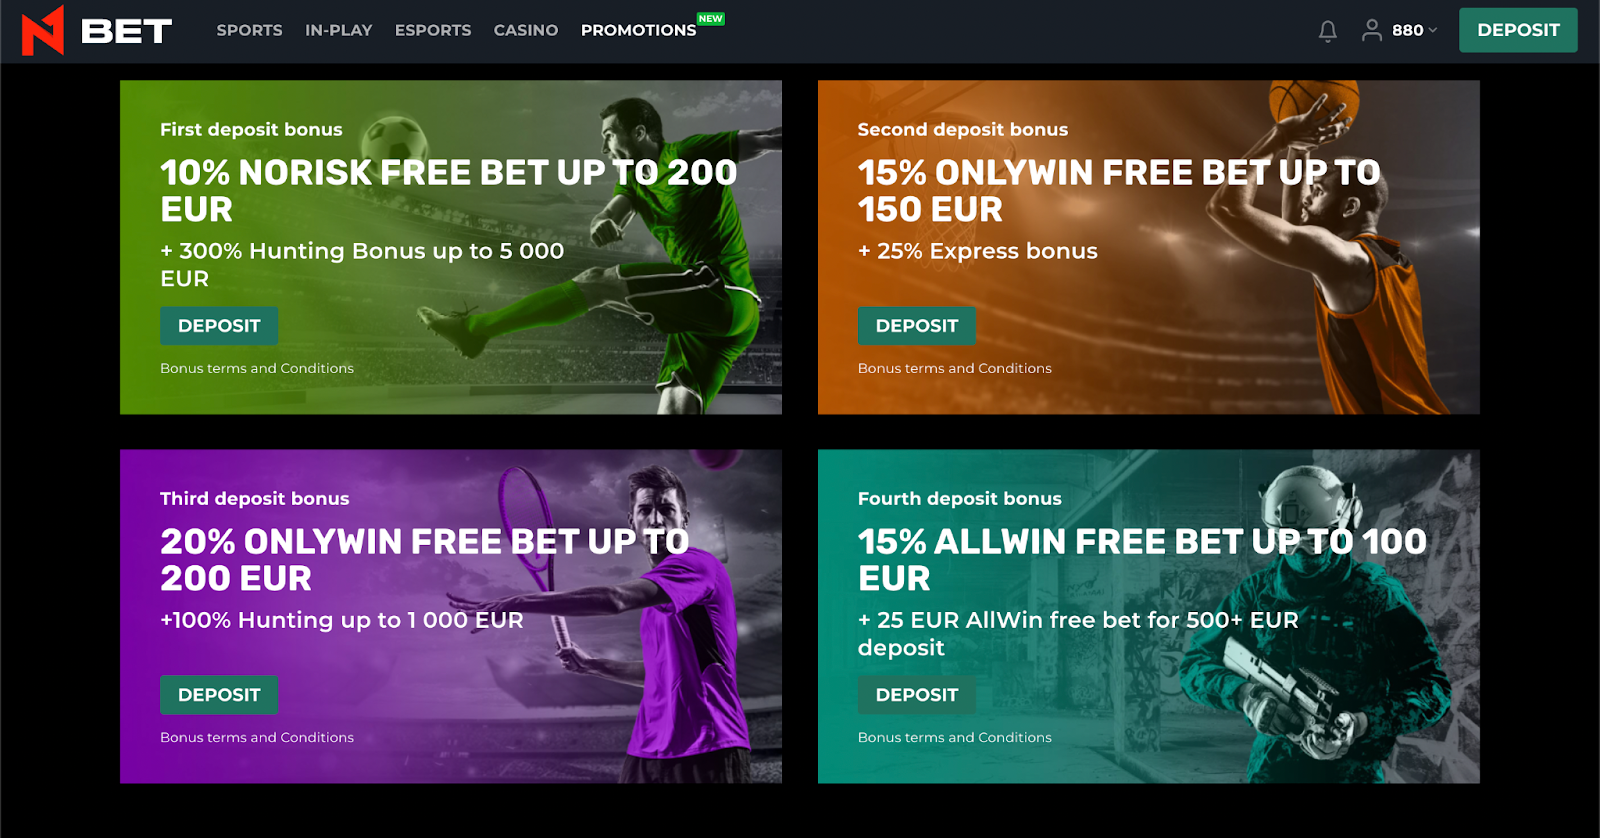 N1Bet.com promotions and affiliate bonuses. 